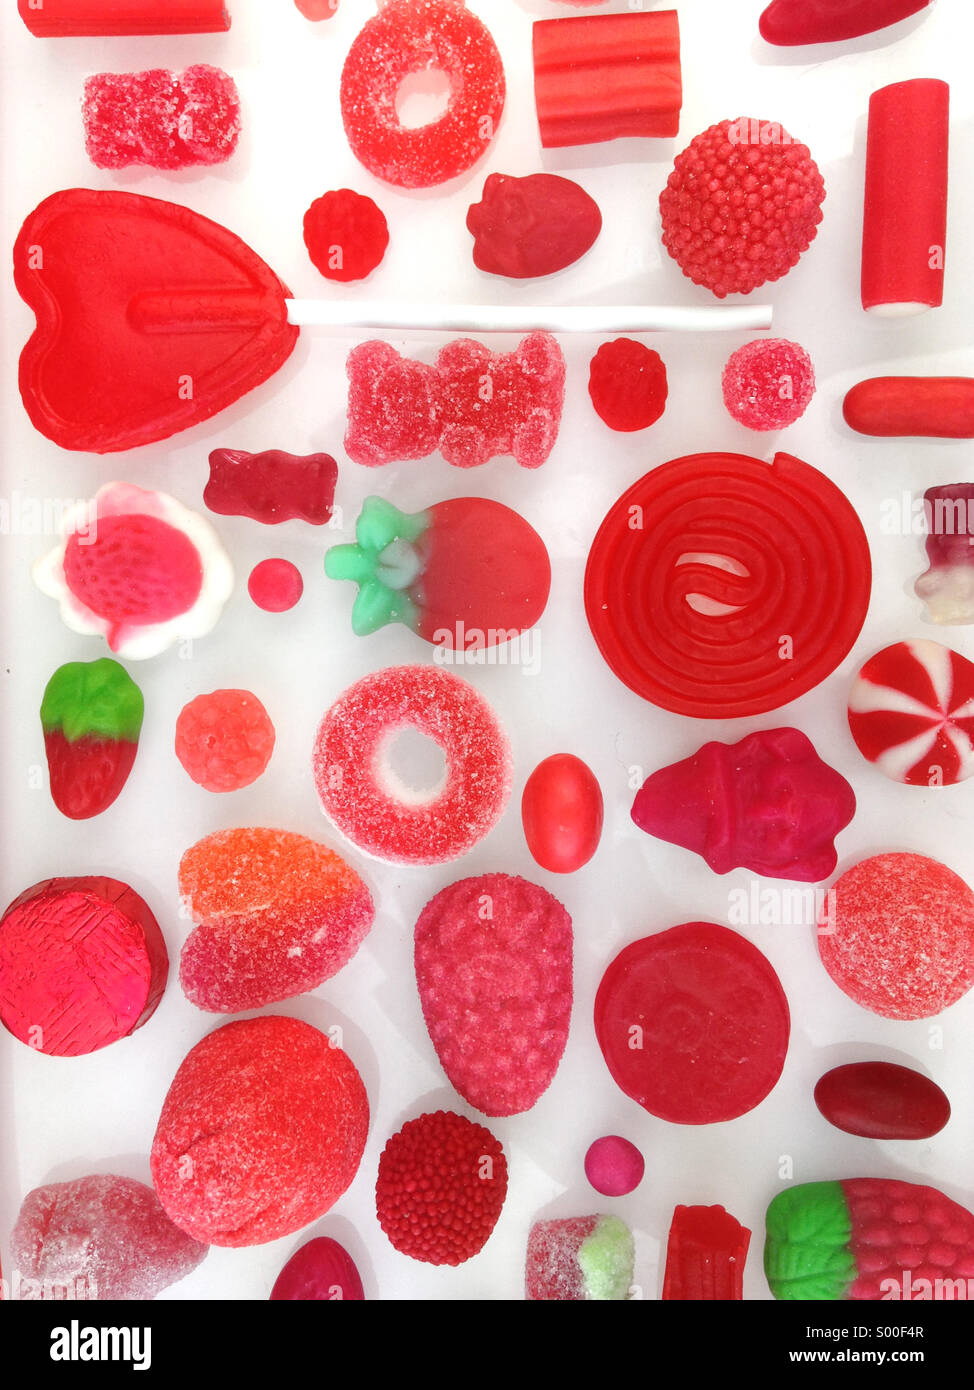 Assotted selection of red sweets and candies. Stock Photo